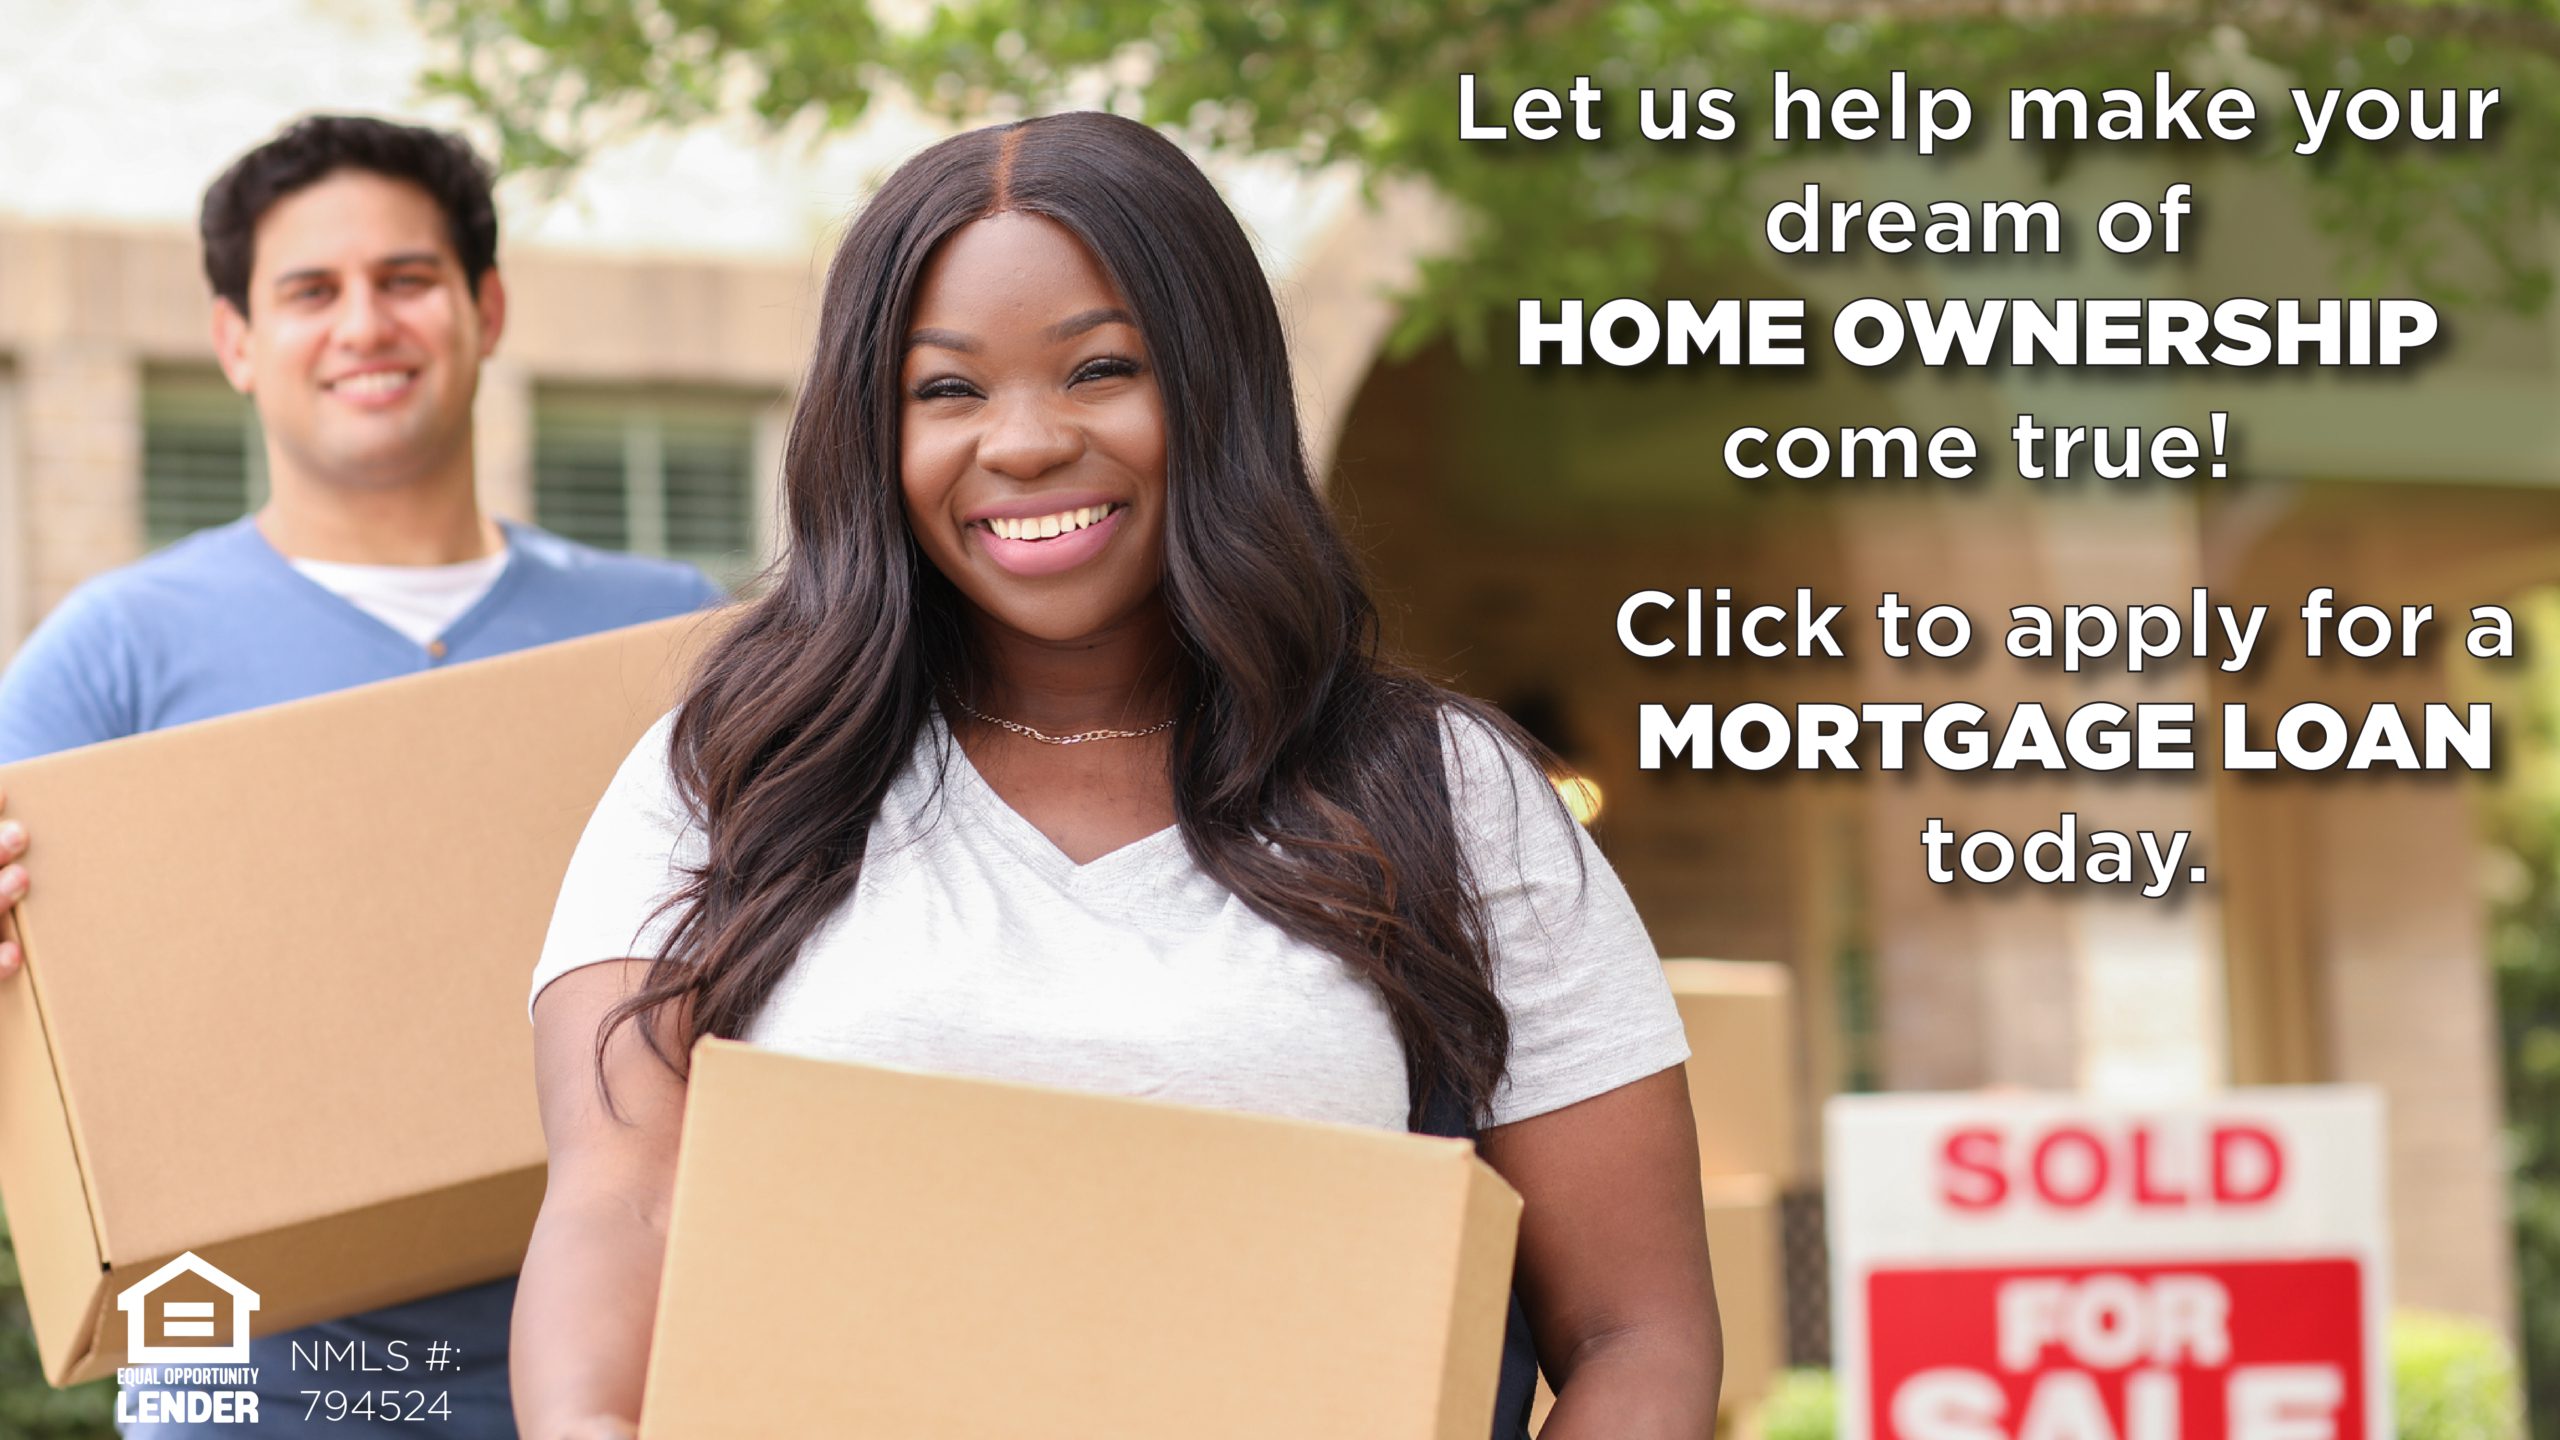 Let us help make your dream of home ownership come true! Click to apply for a mortgage loan today.